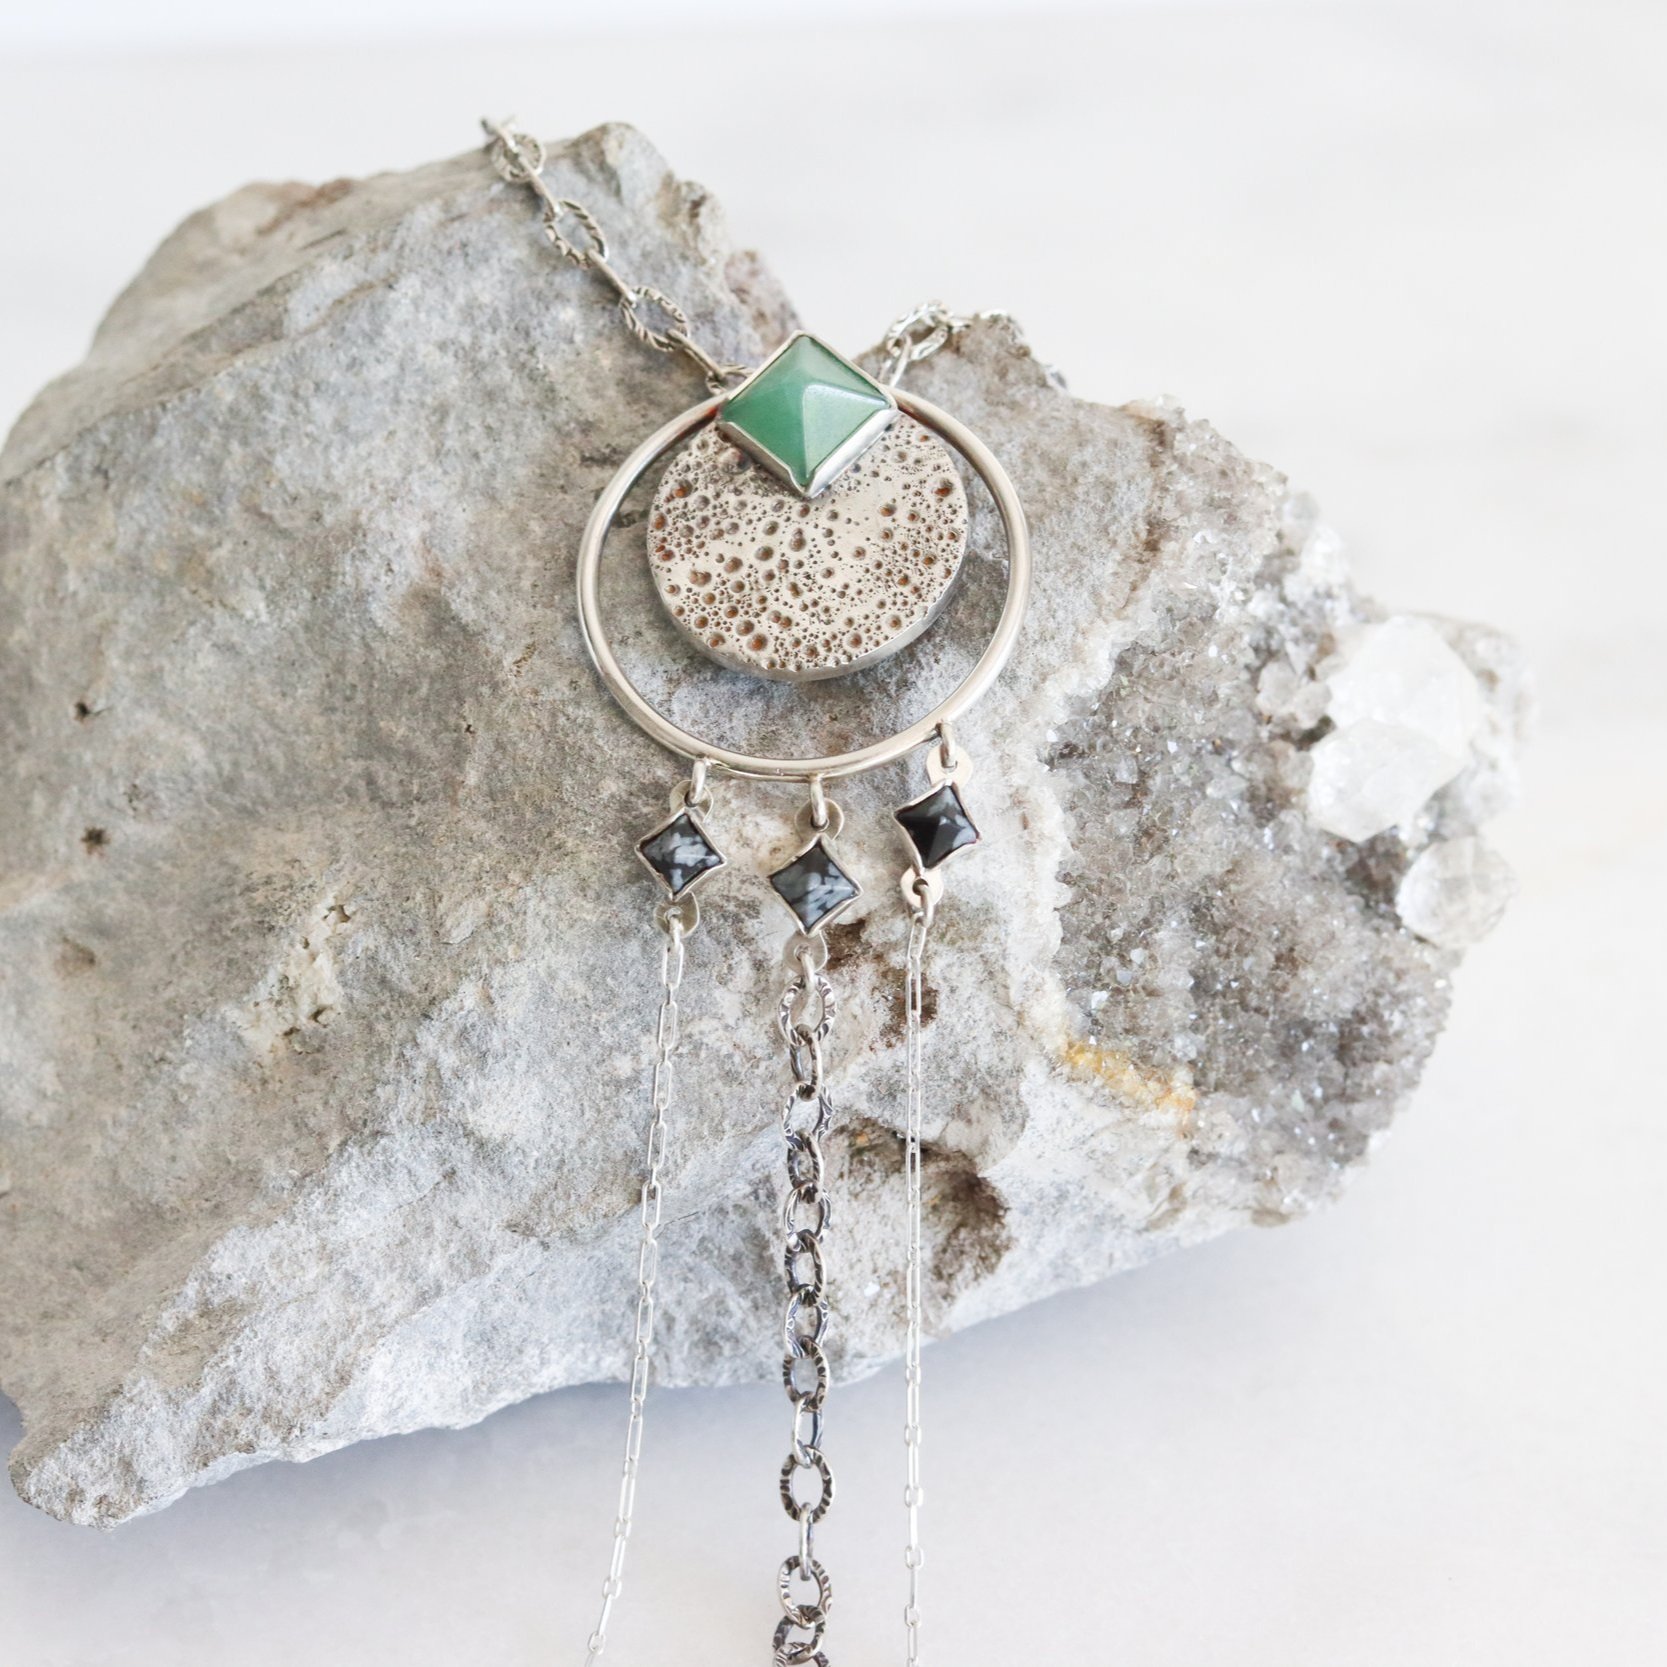 Aventurine and Snowflake Obsidian Necklace